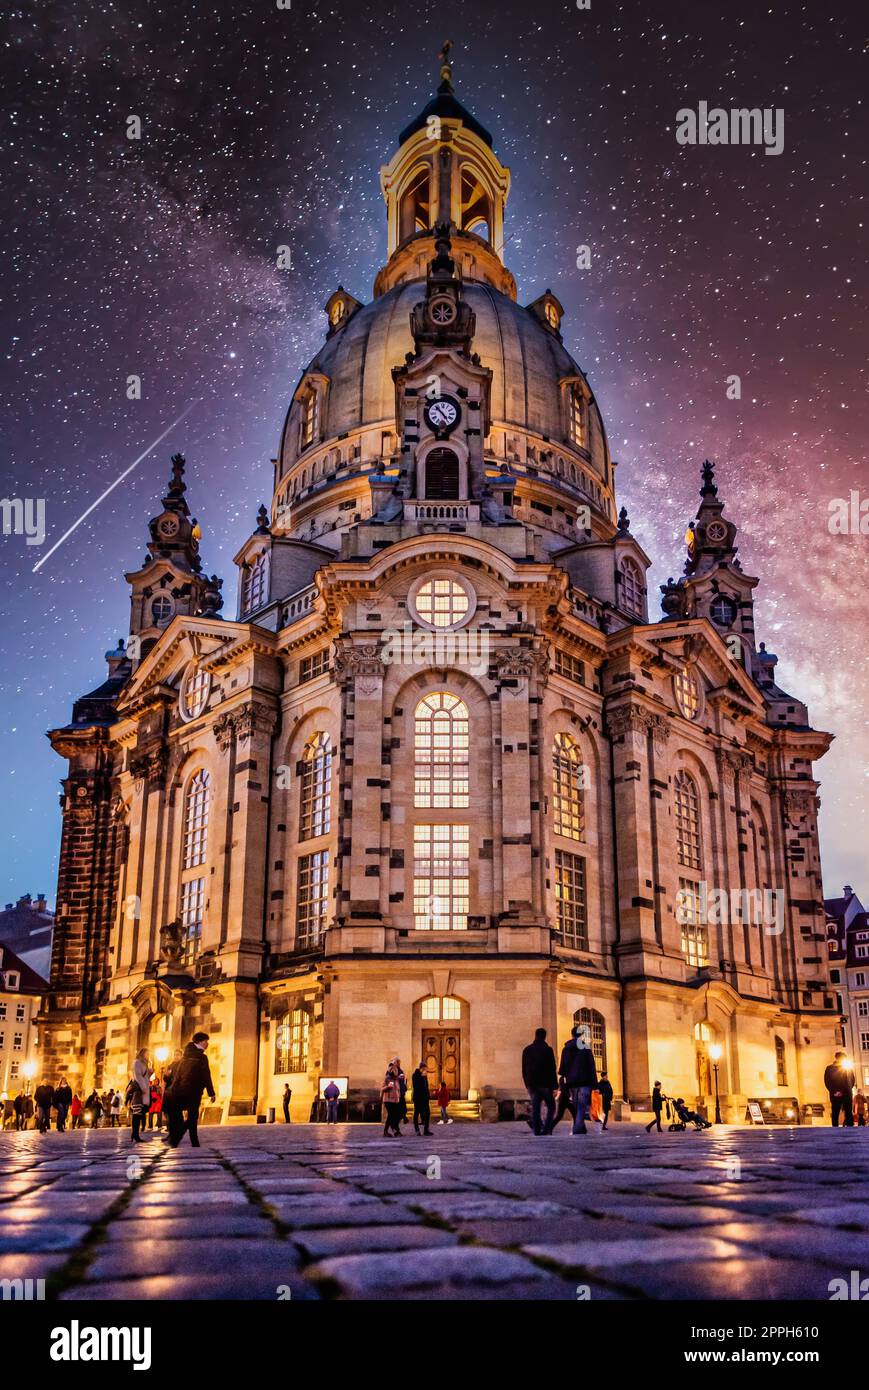 Beautiful low angle photo of Frauenkirche Lutheran church in Dresden, Germany under night sky Stock Photo